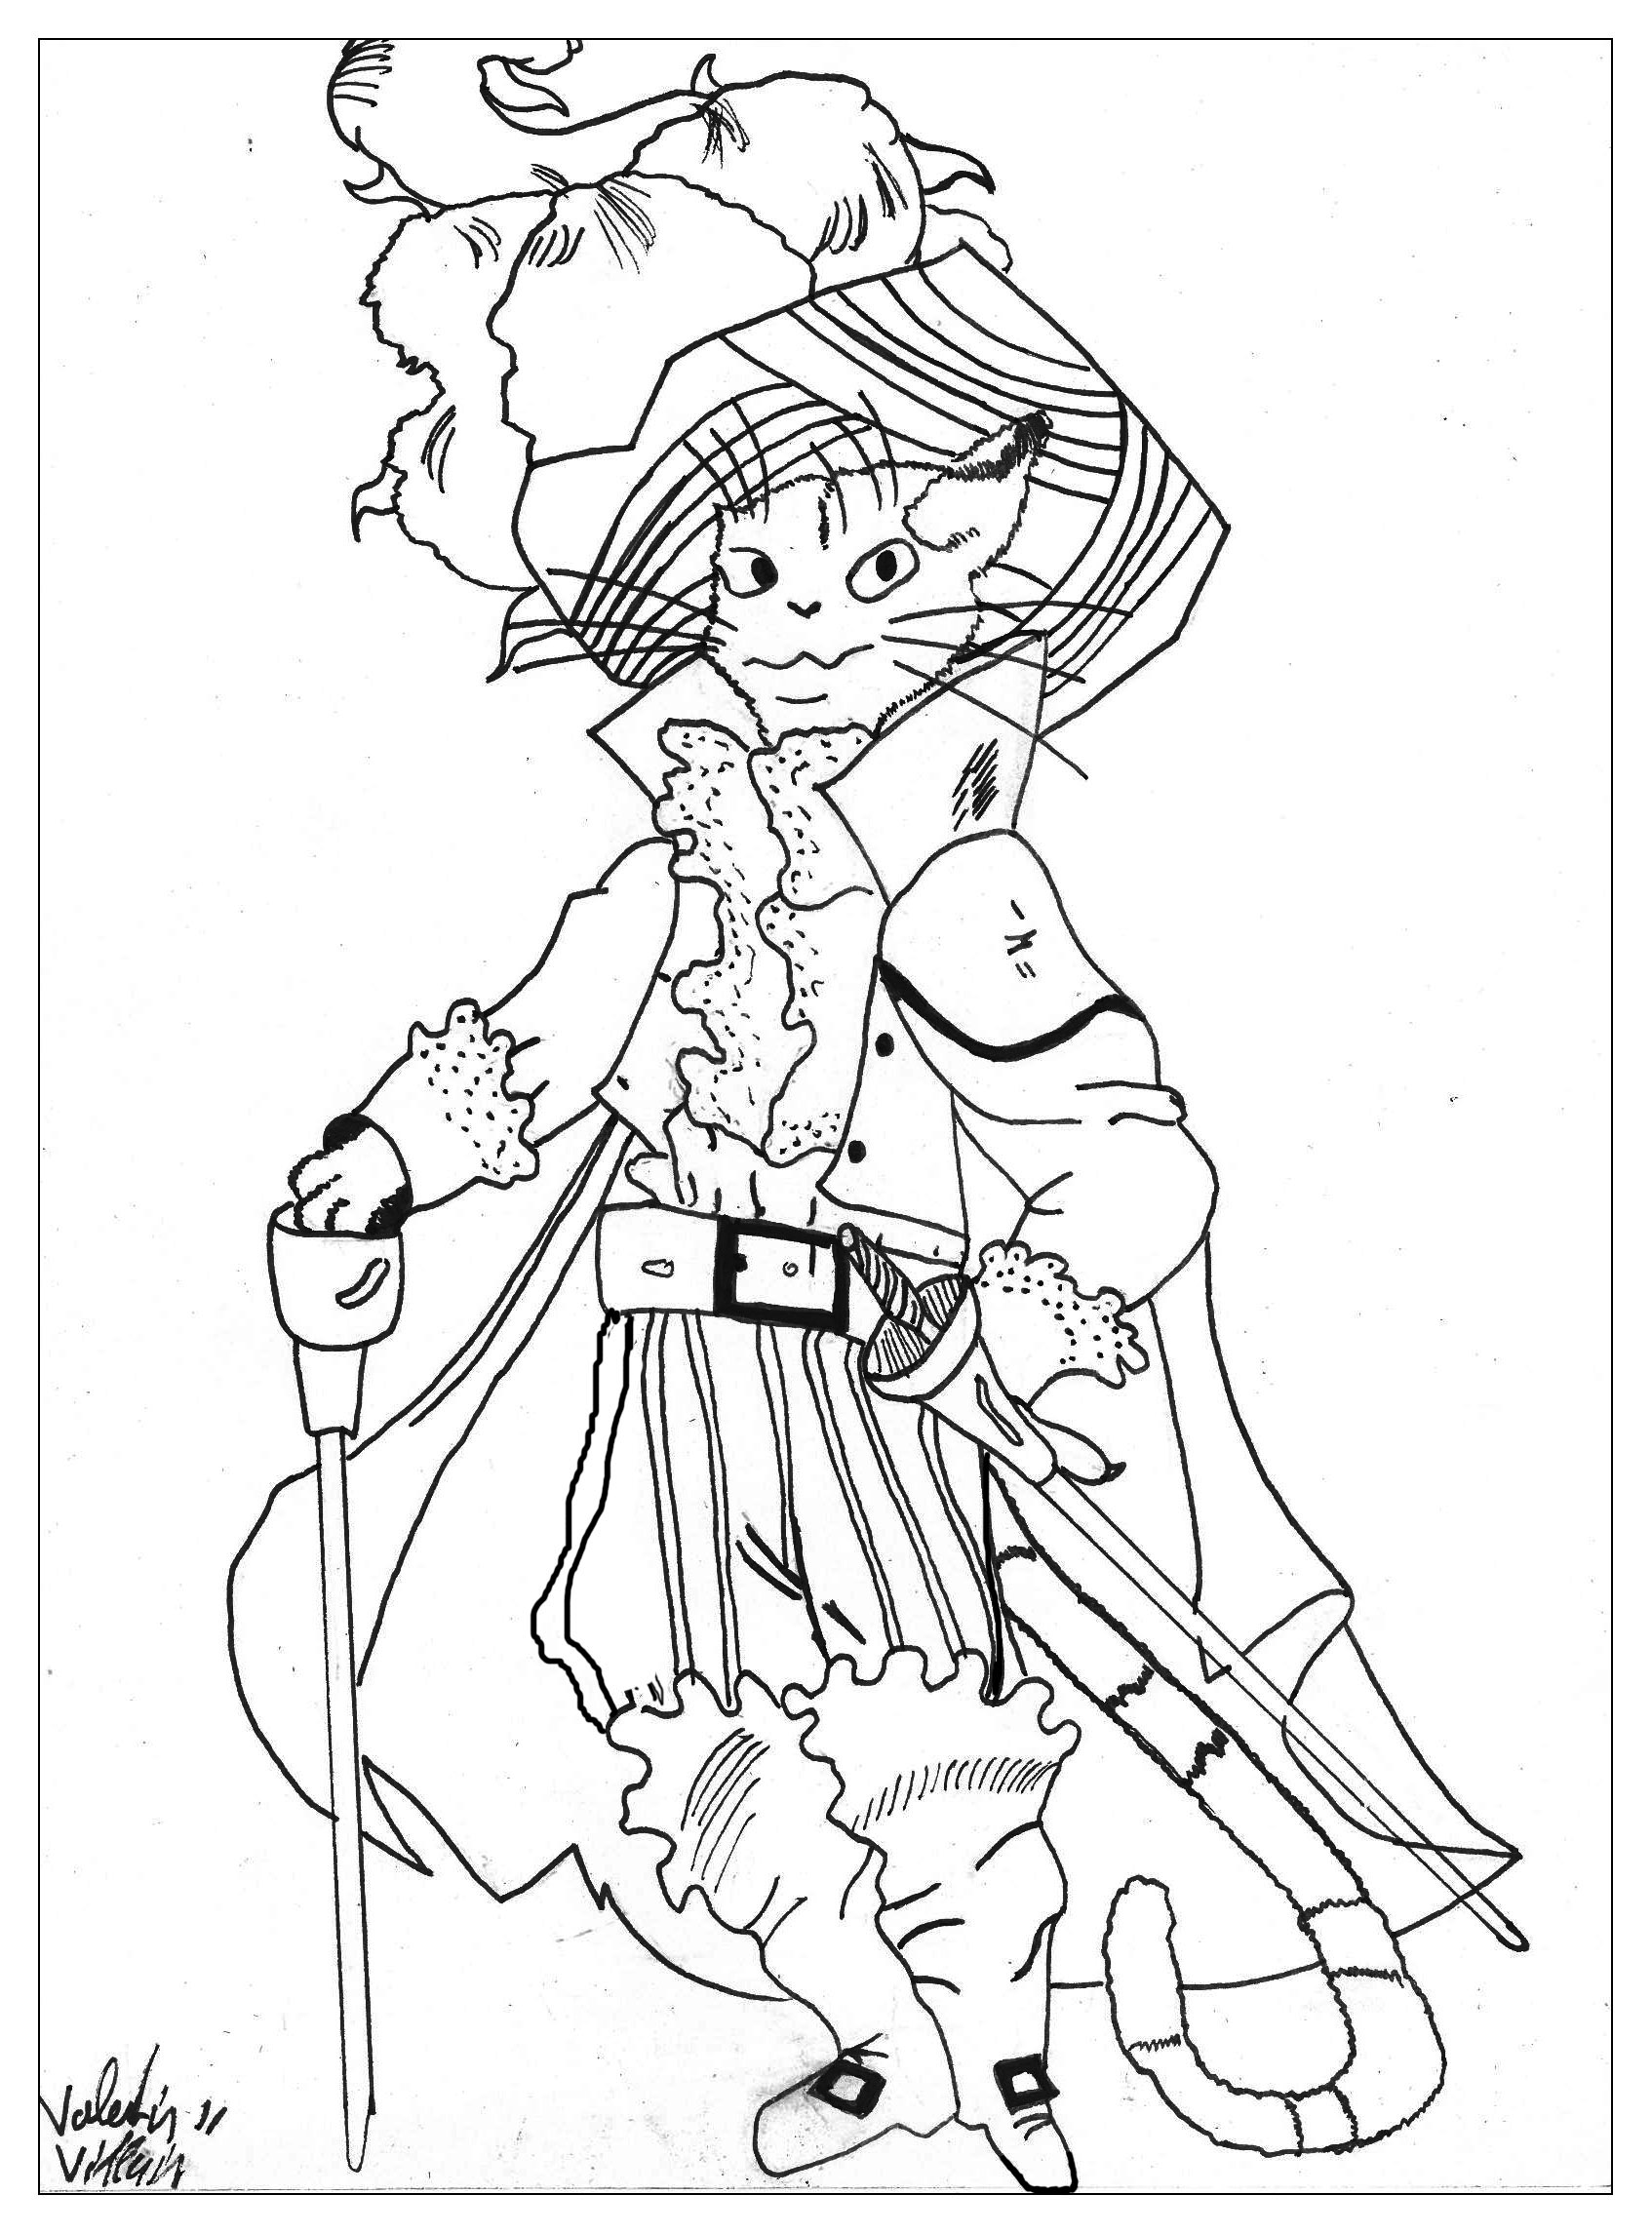 Puss in Boots - Art Adult Coloring Pages